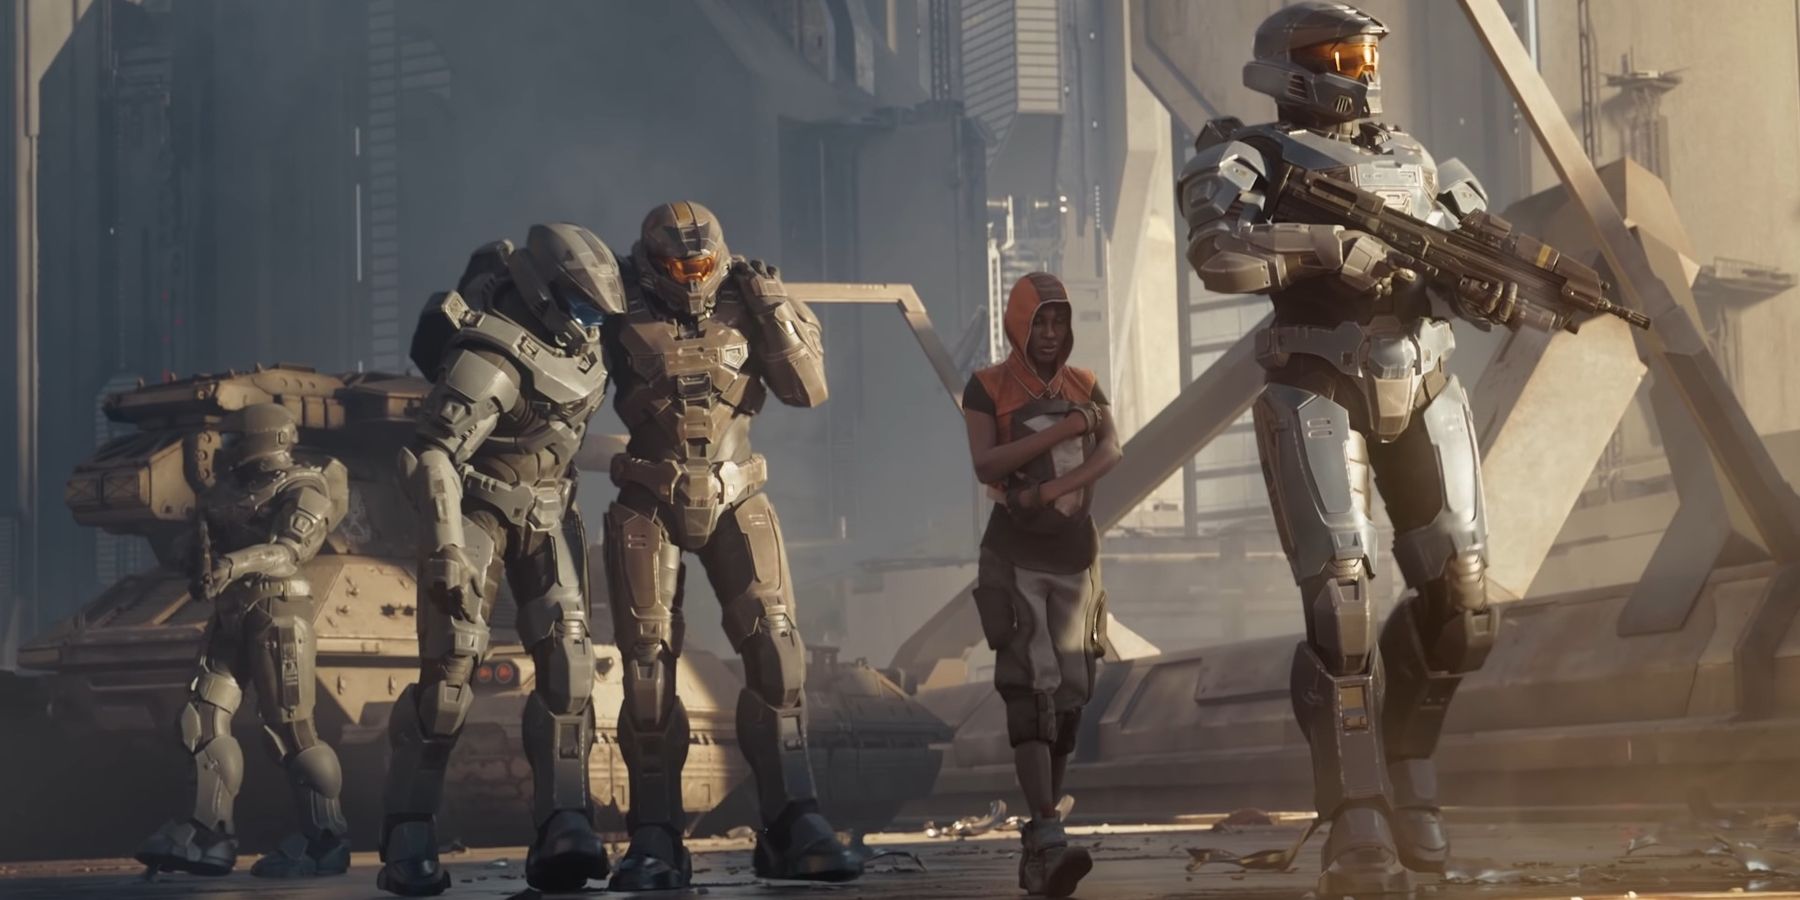 Screenshot of several Spartans in Halo Infinite